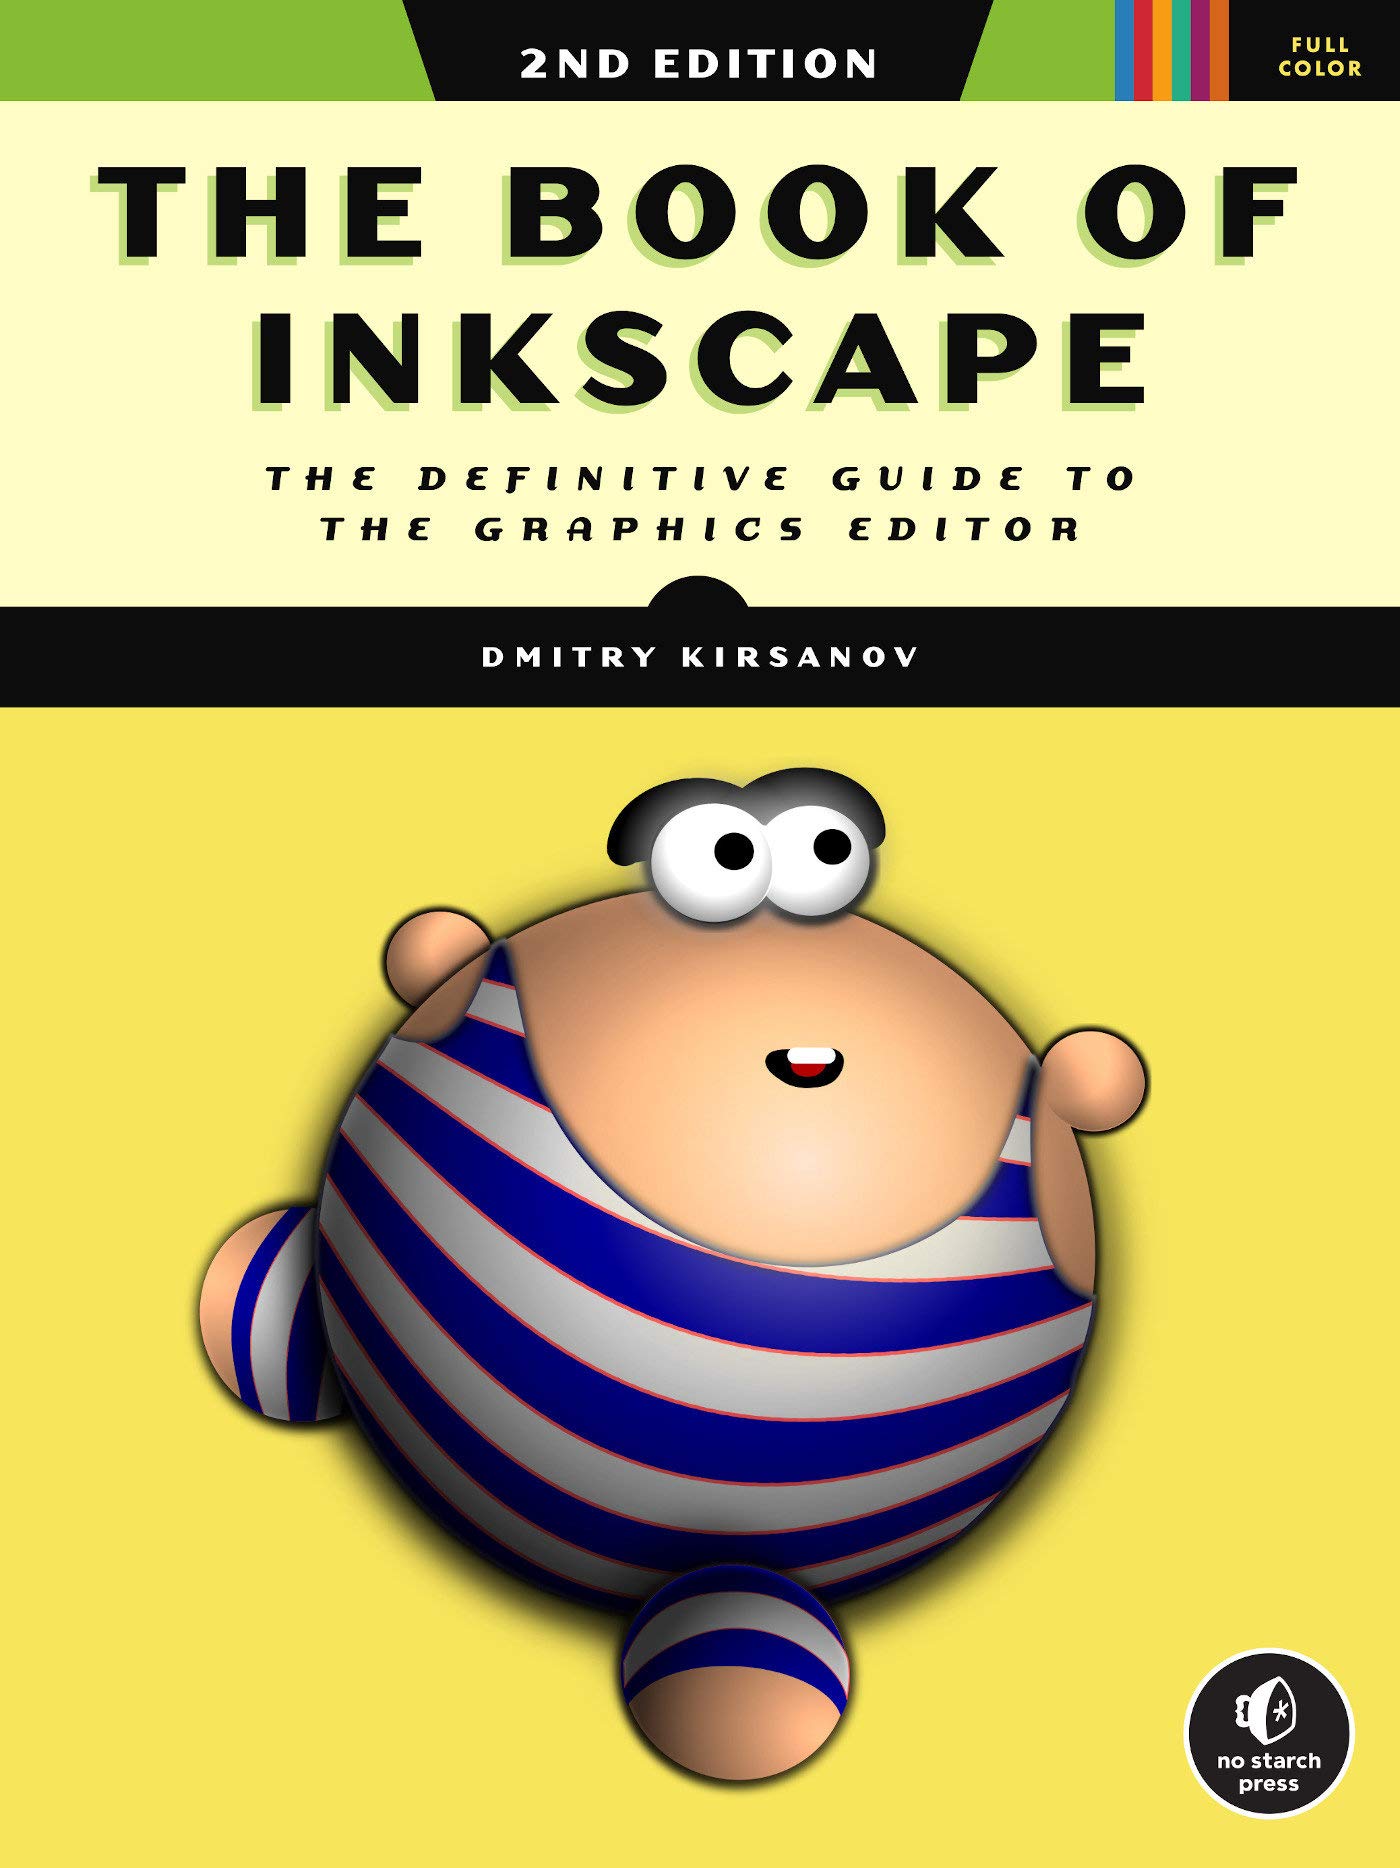 The Book of Inkscape: The Definitive Guide to the Graphics Editor, 2nd Edition by Dmitry Kirsanov